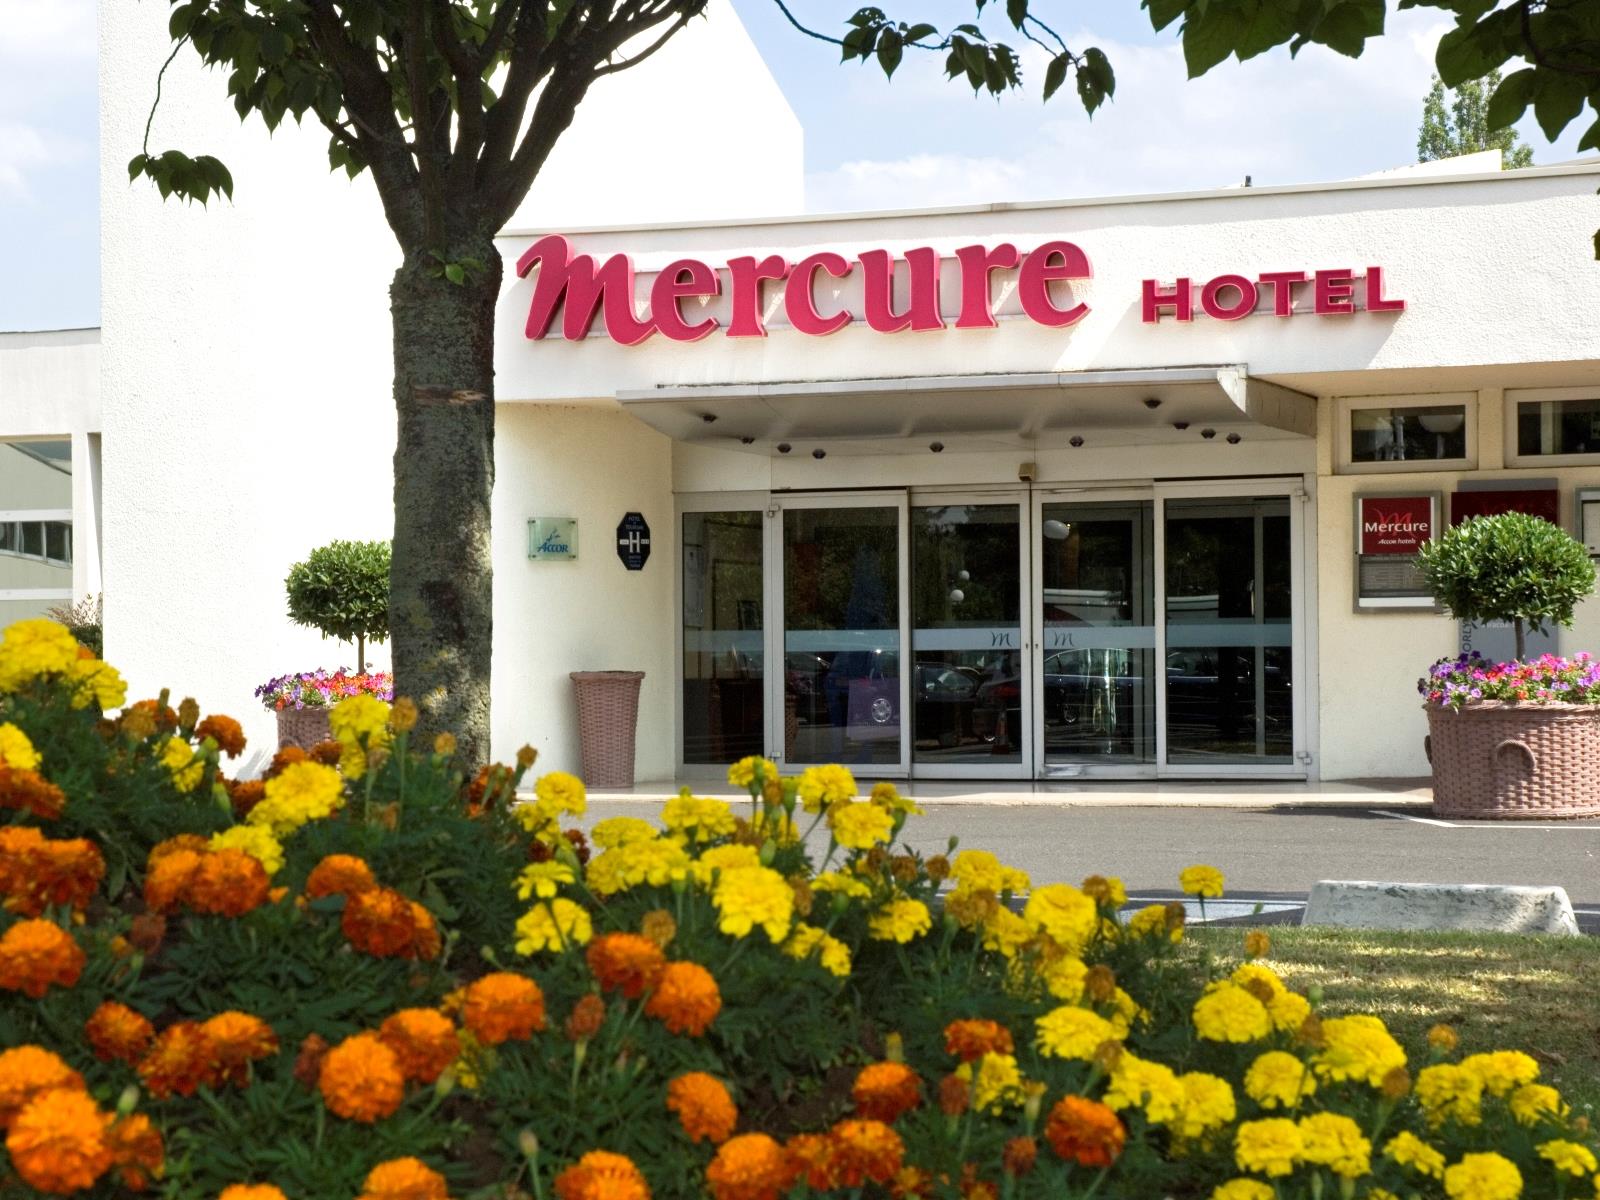 Mercure Orly Aeroport Hotel Booking,Mercure Orly Aeroport Hotel Resort,Mercure Orly Aeroport Hotel reservation,Mercure Orly Aeroport Hotel deals,Mercure Orly Aeroport Hotel Phone Number,Mercure Orly Aeroport Hotel website,Mercure Orly Aeroport Hotel E-mail,Mercure Orly Aeroport Hotel address,Mercure Orly Aeroport Hotel Overview,Rooms & Rates,Mercure Orly Aeroport Hotel Photos,Mercure Orly Aeroport Hotel Location Amenities,Mercure Orly Aeroport Hotel Q&A,Mercure Orly Aeroport Hotel Map,Mercure Orly Aeroport Hotel Gallery,Mercure Orly Aeroport Hotel France 2016, France Mercure Orly Aeroport Hotel room types 2016, France Mercure Orly Aeroport Hotel price 2016, Mercure Orly Aeroport Hotel in France 2016, France Mercure Orly Aeroport Hotel address, Mercure Orly Aeroport Hotel France booking online, France Mercure Orly Aeroport Hotel travel services, France Mercure Orly Aeroport Hotel pick up services.